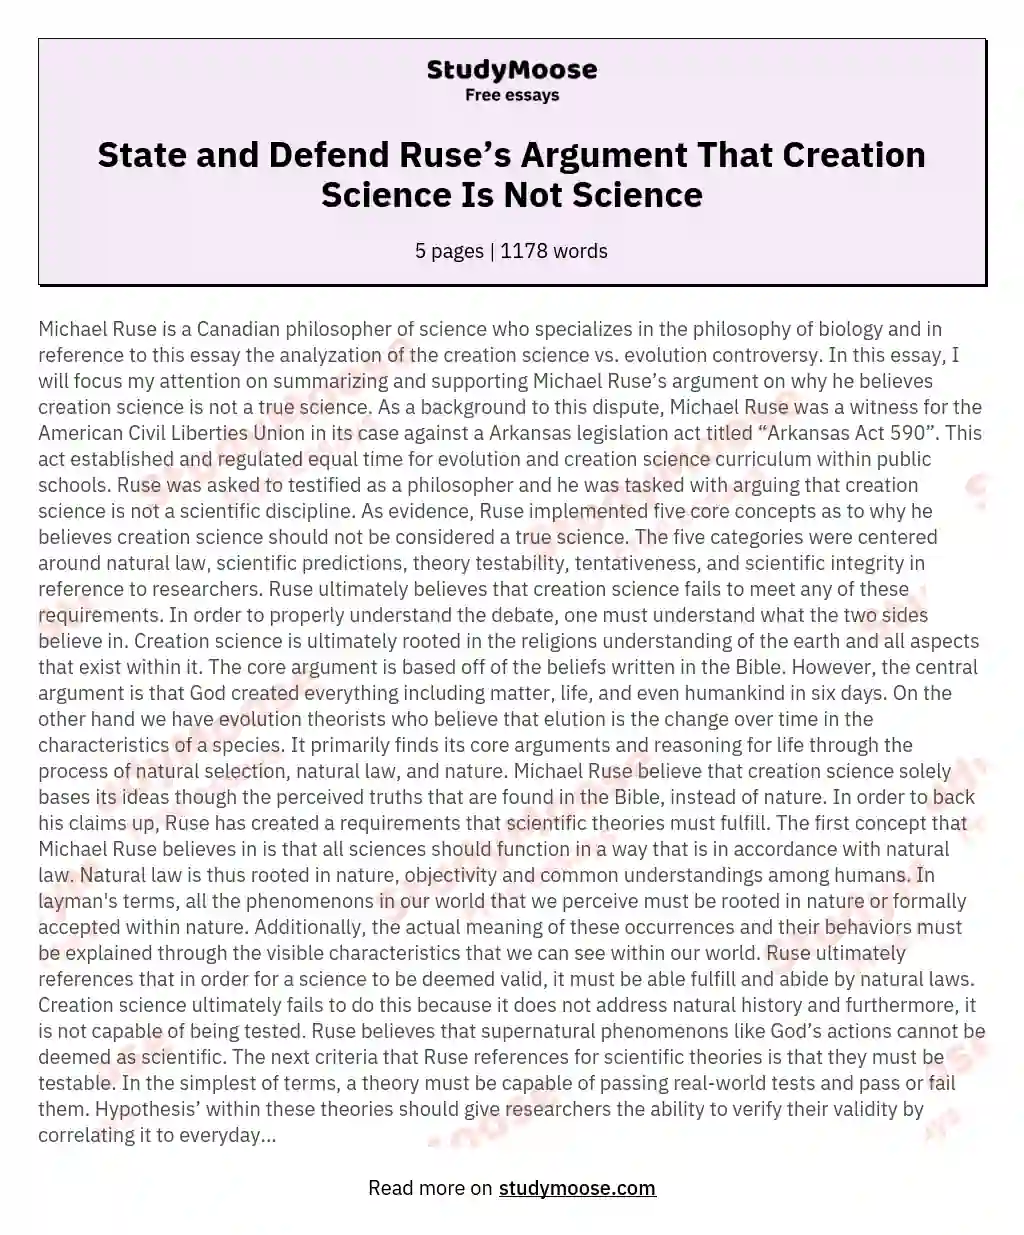 State and Defend Ruse’s Argument That Creation Science Is Not Science essay